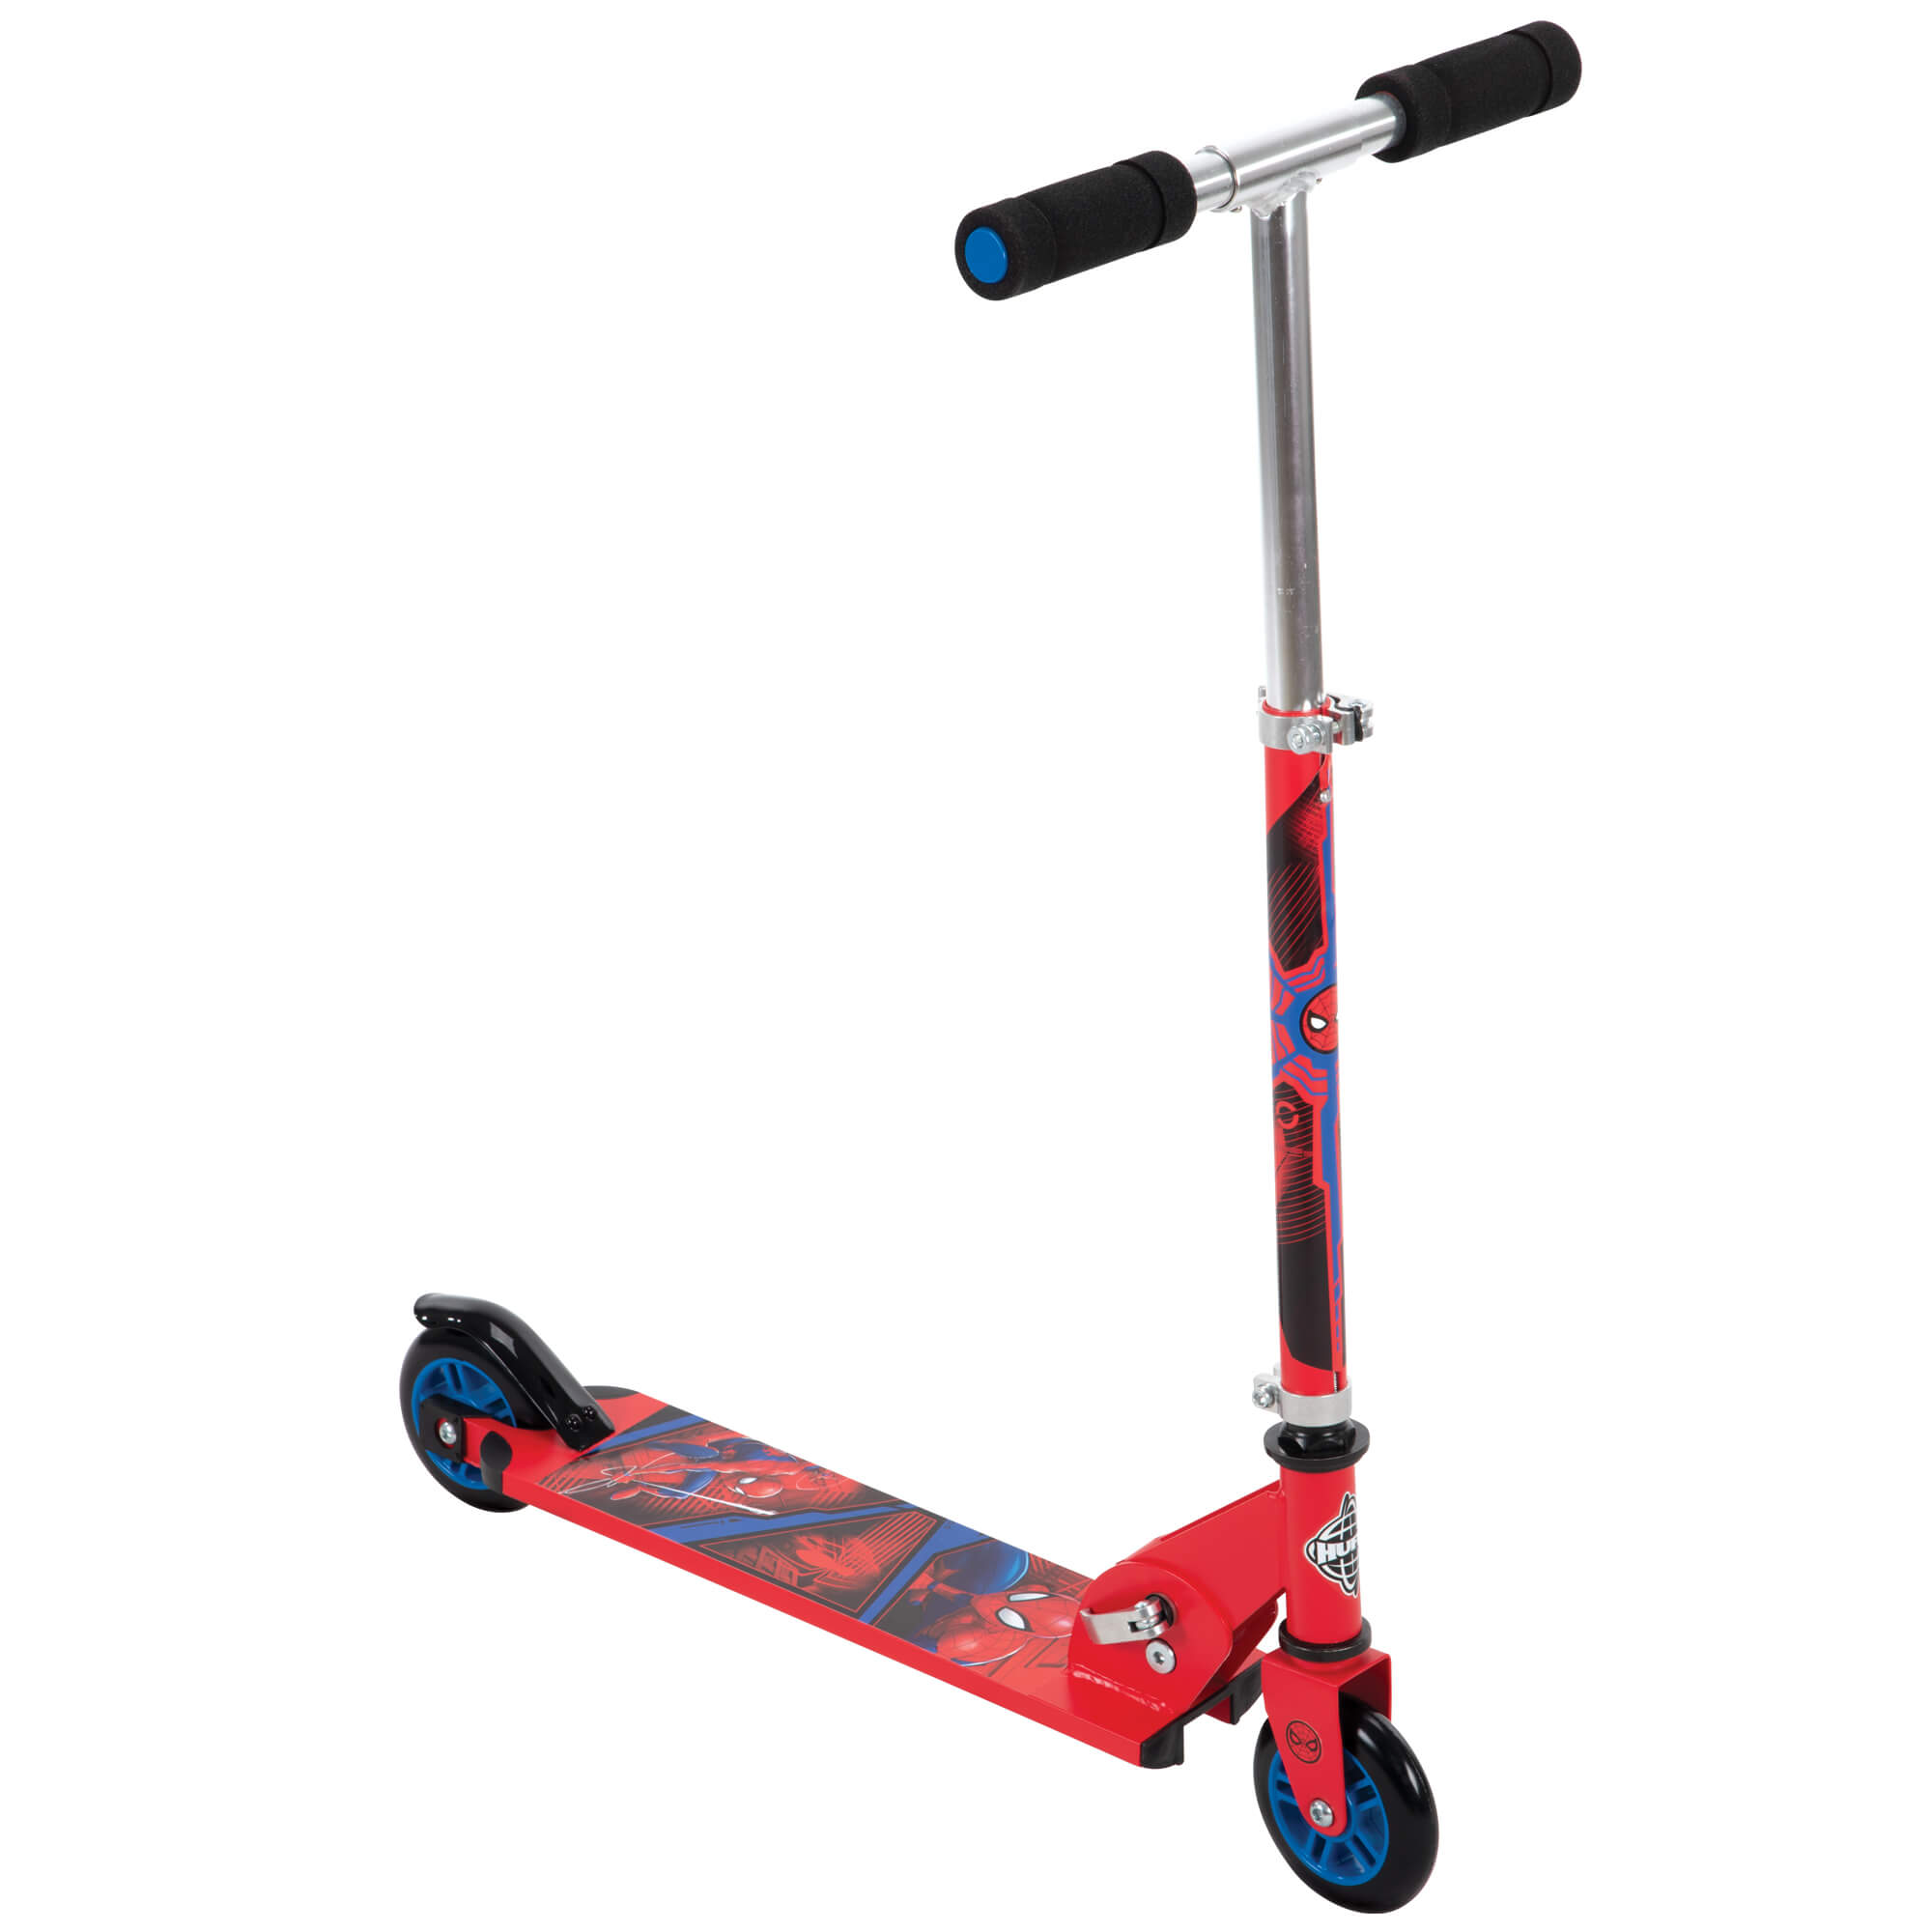 Marvel Spider-Man Inline Folding Kick Scooter for Boys, by Huffy - image 4 of 9